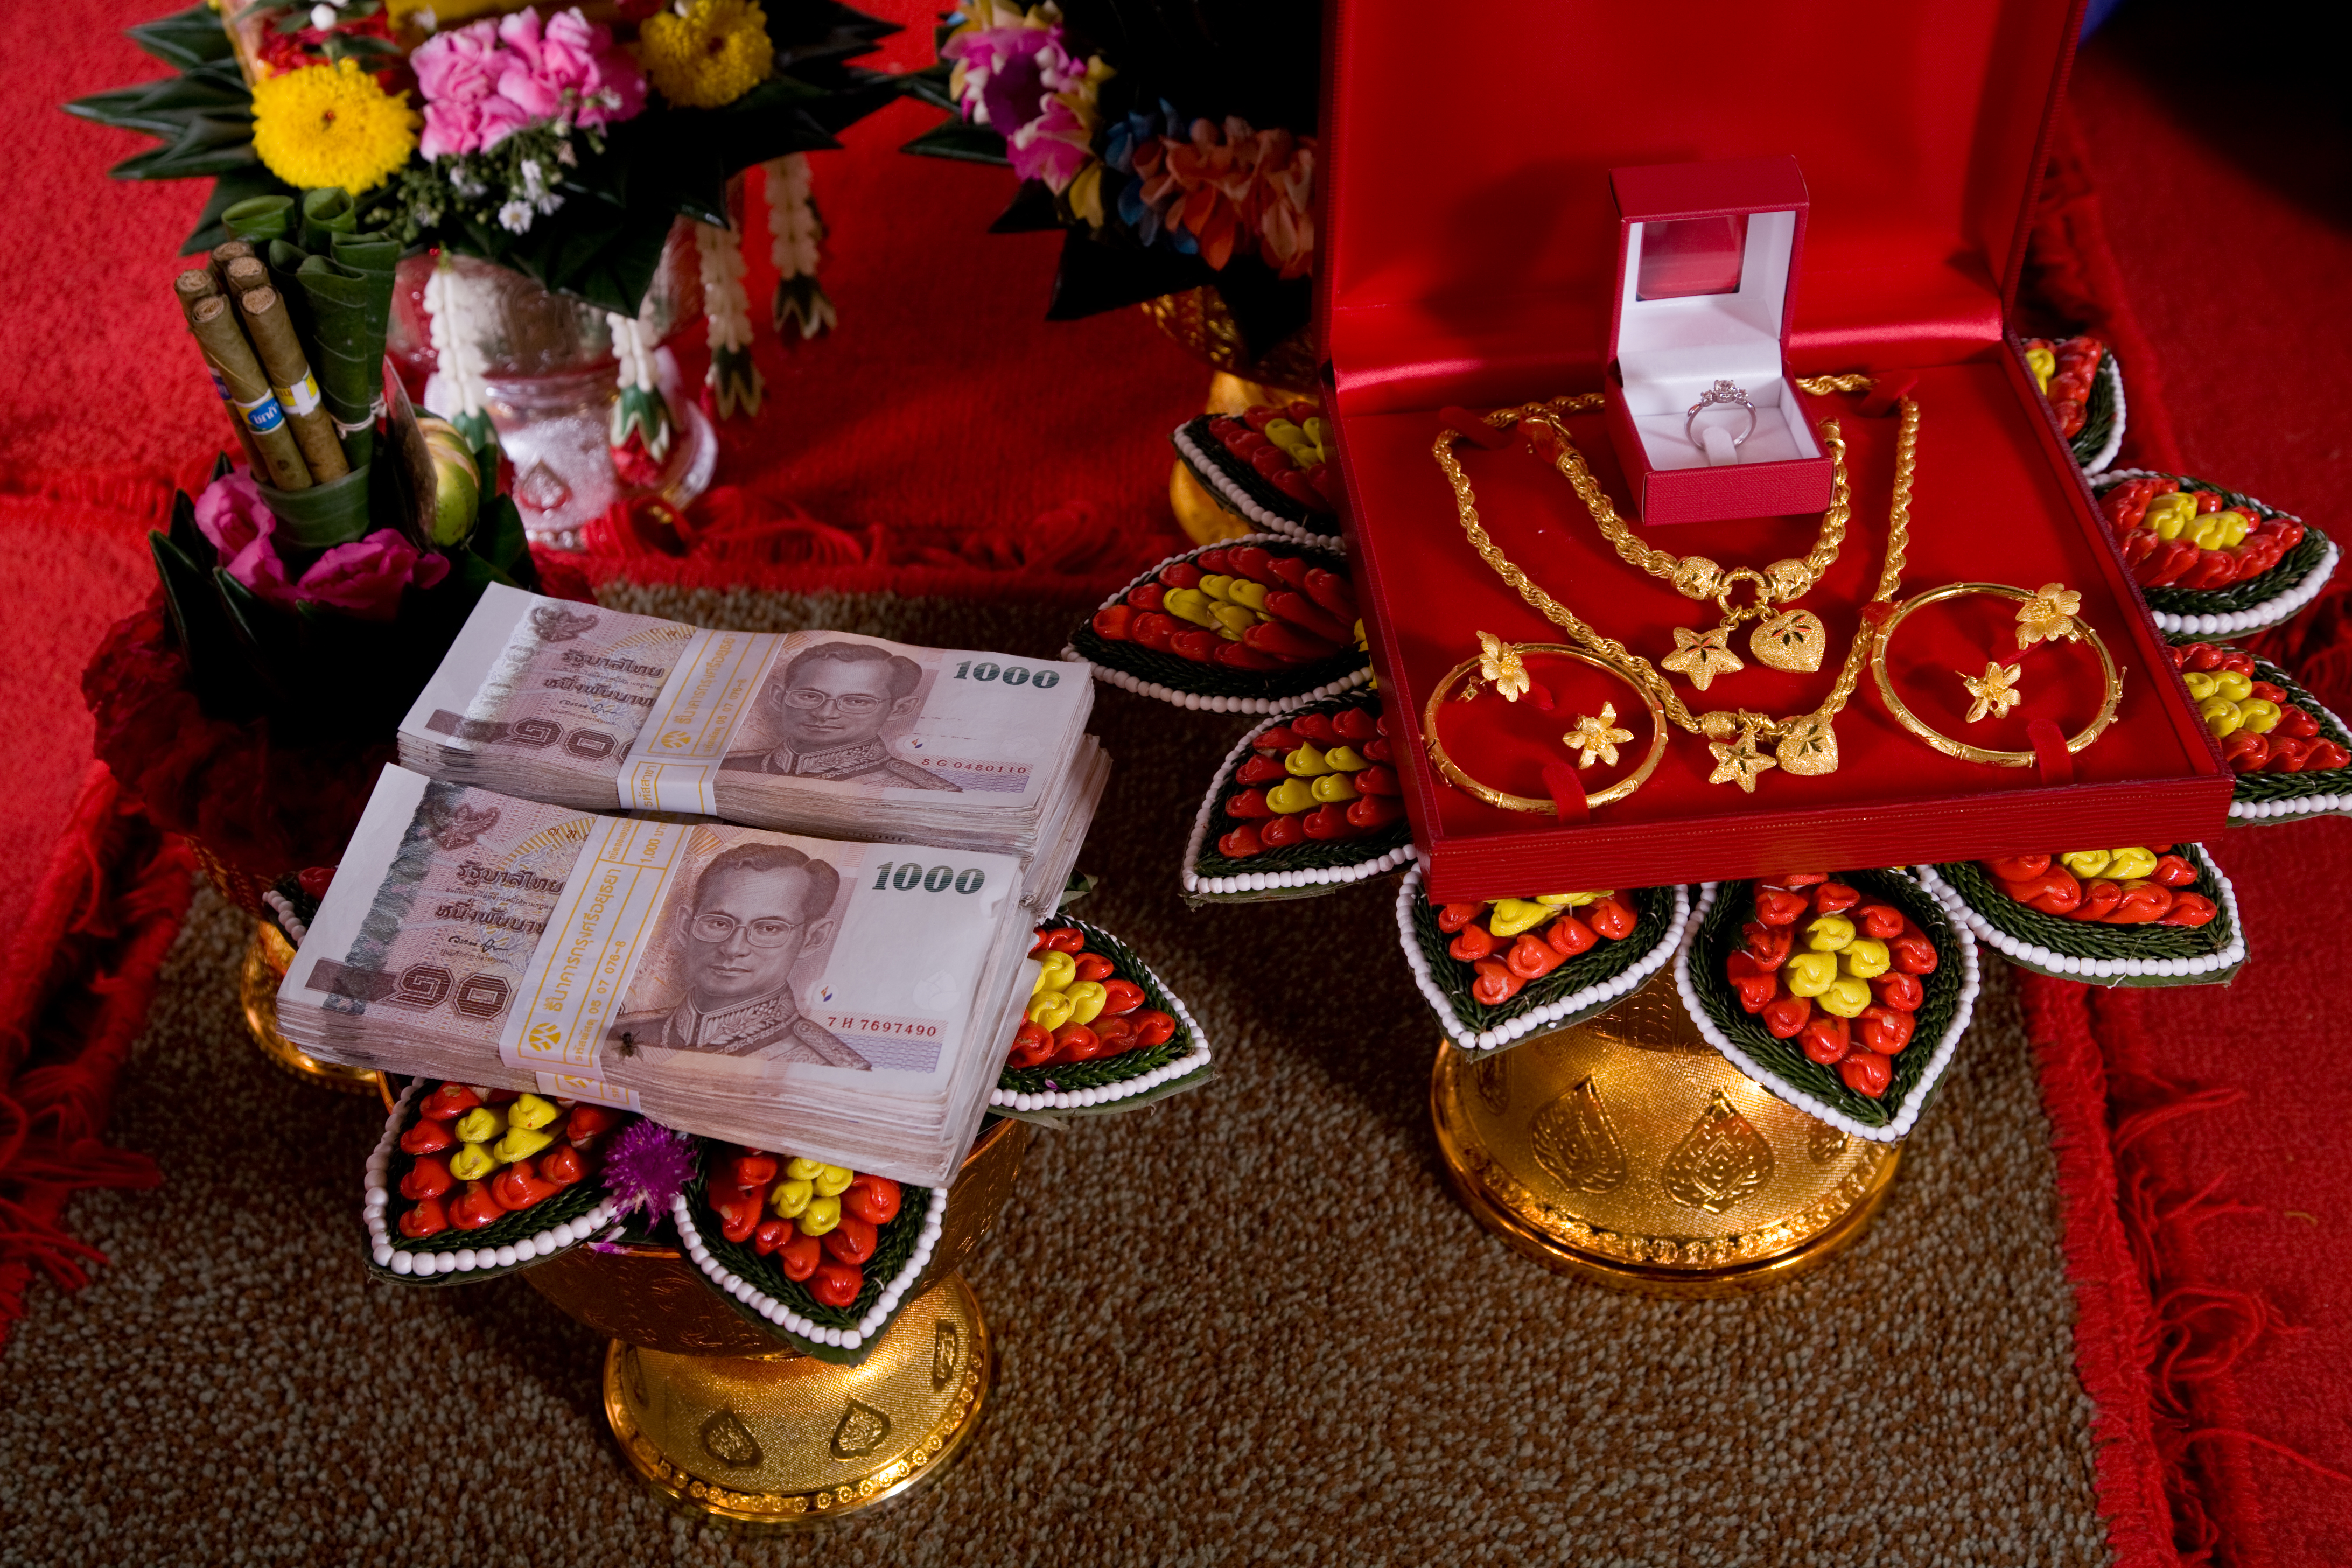 The “sin sod” or dowry is a longstanding Thai custom. Photo: Wikimedia Commons